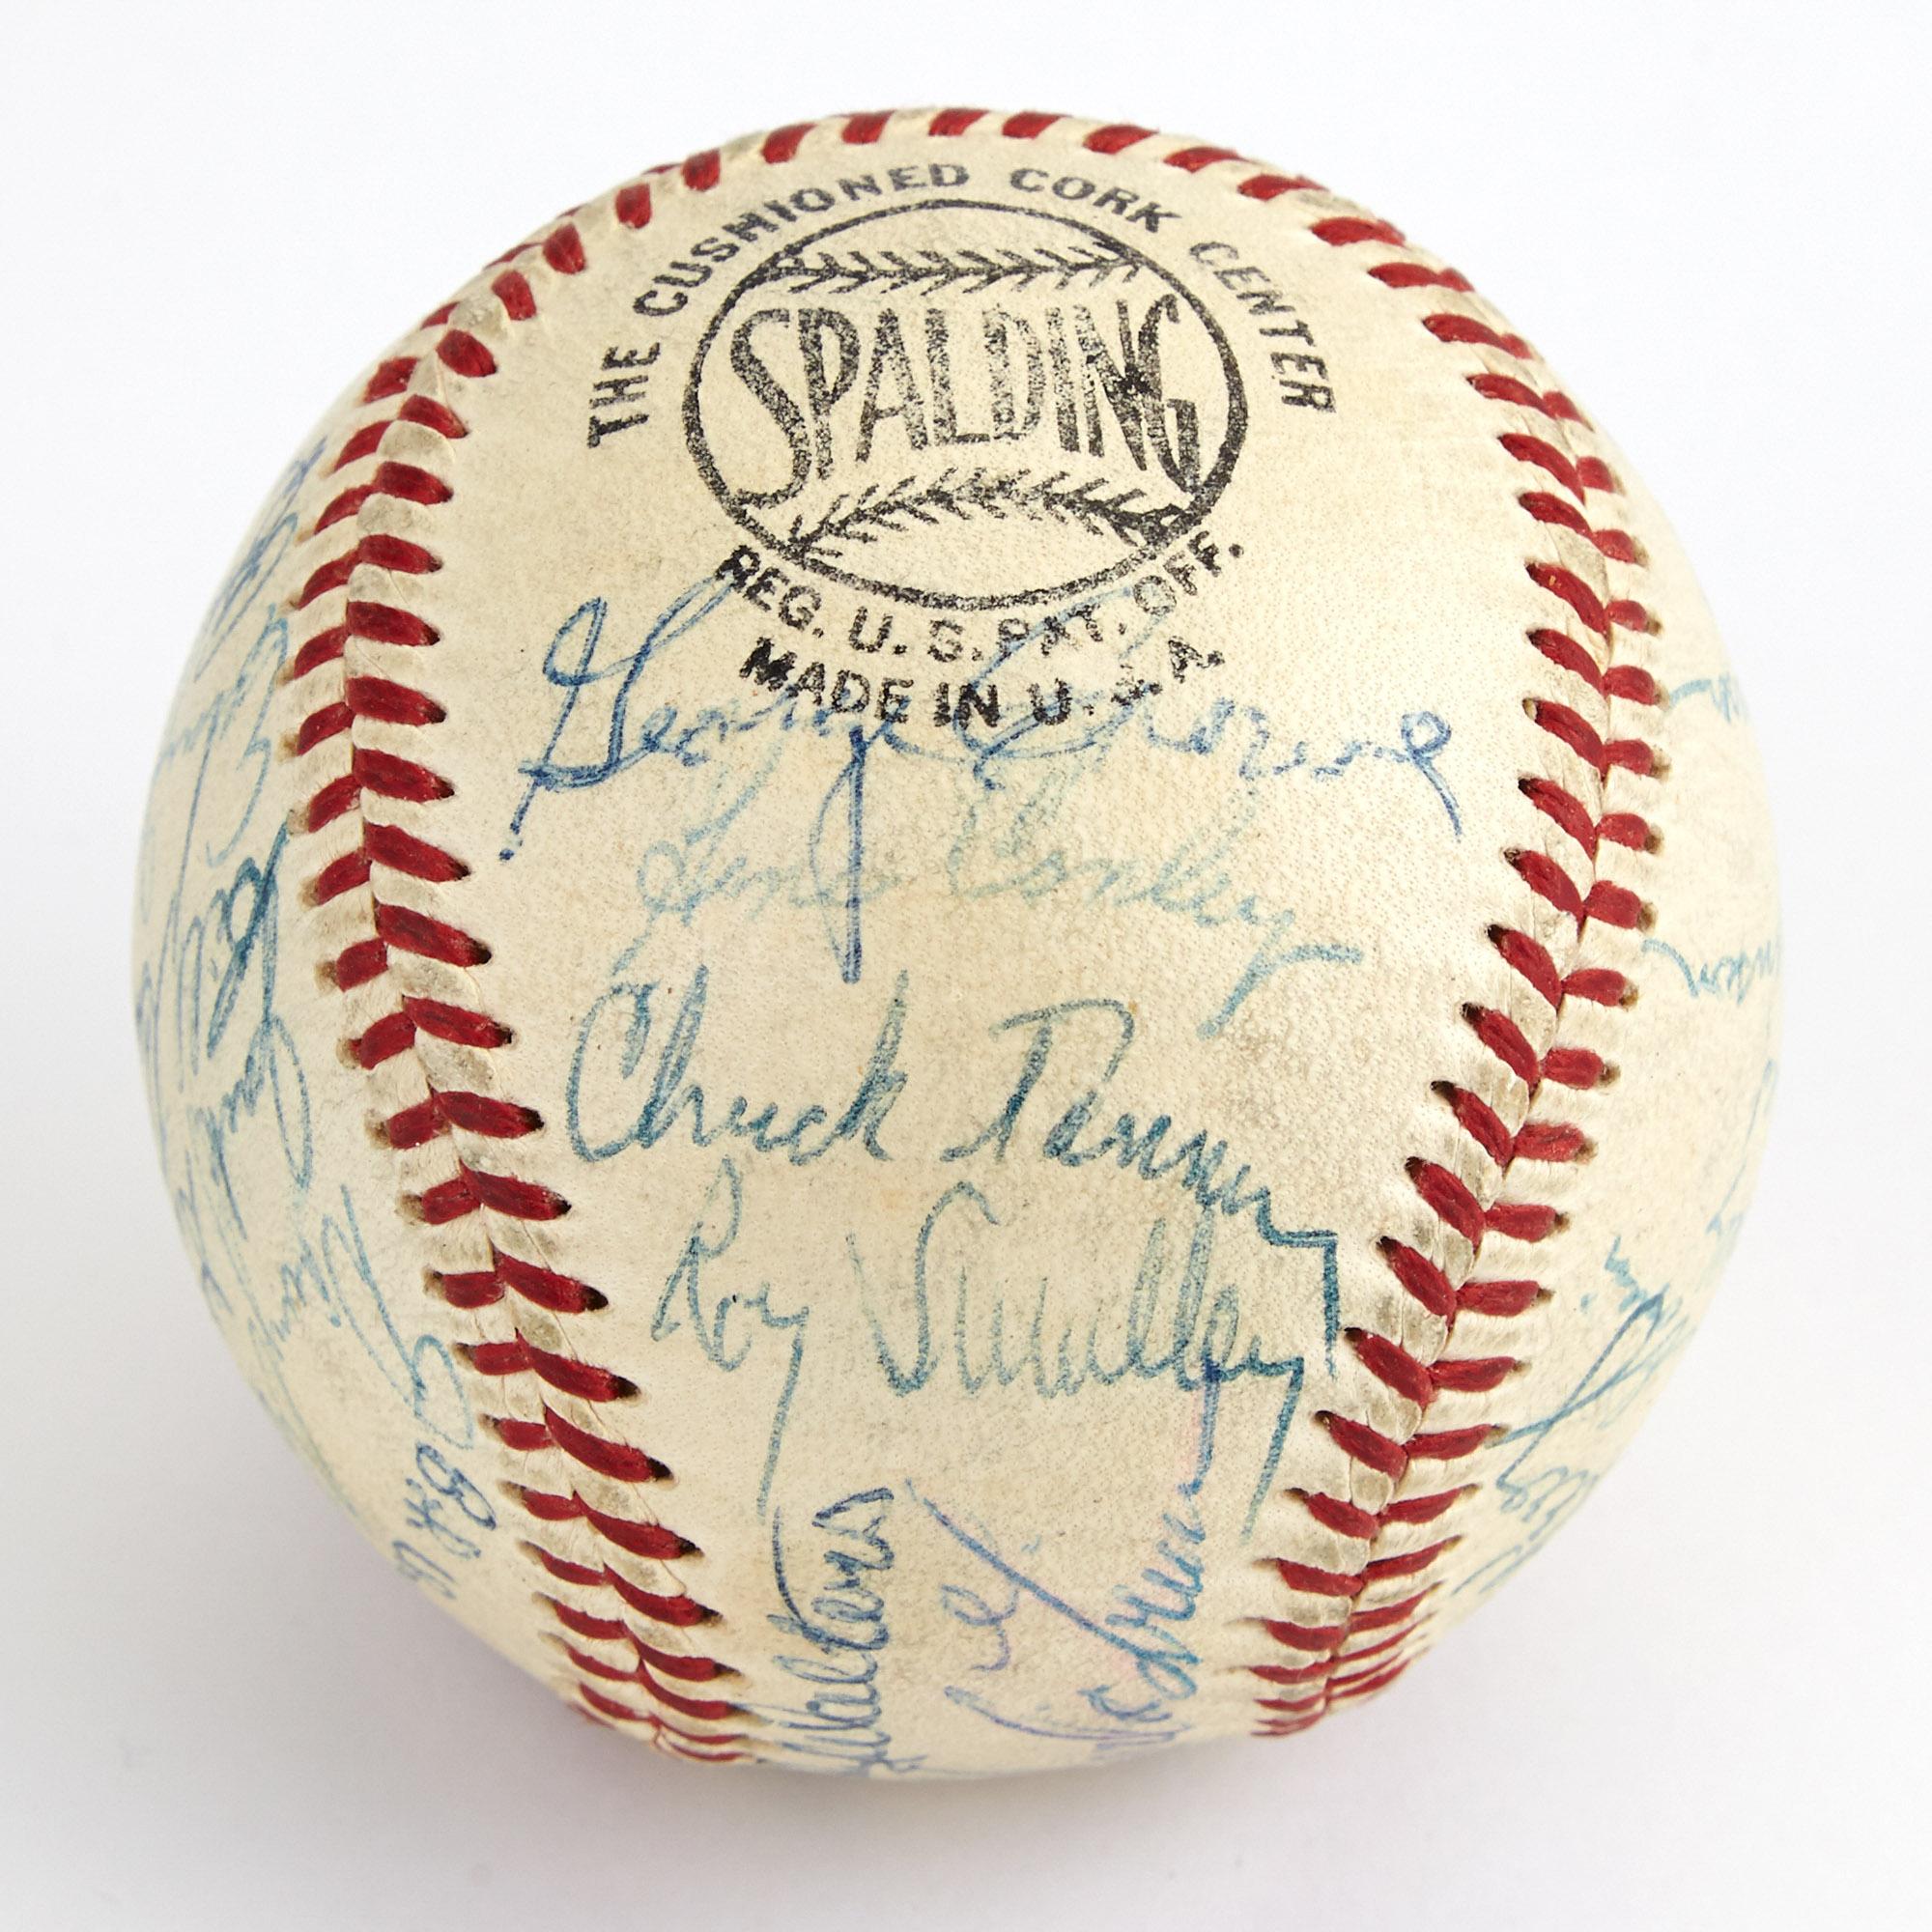 Sold at Auction: A Hank Aaron Signed 1957 Milwaukee Braves